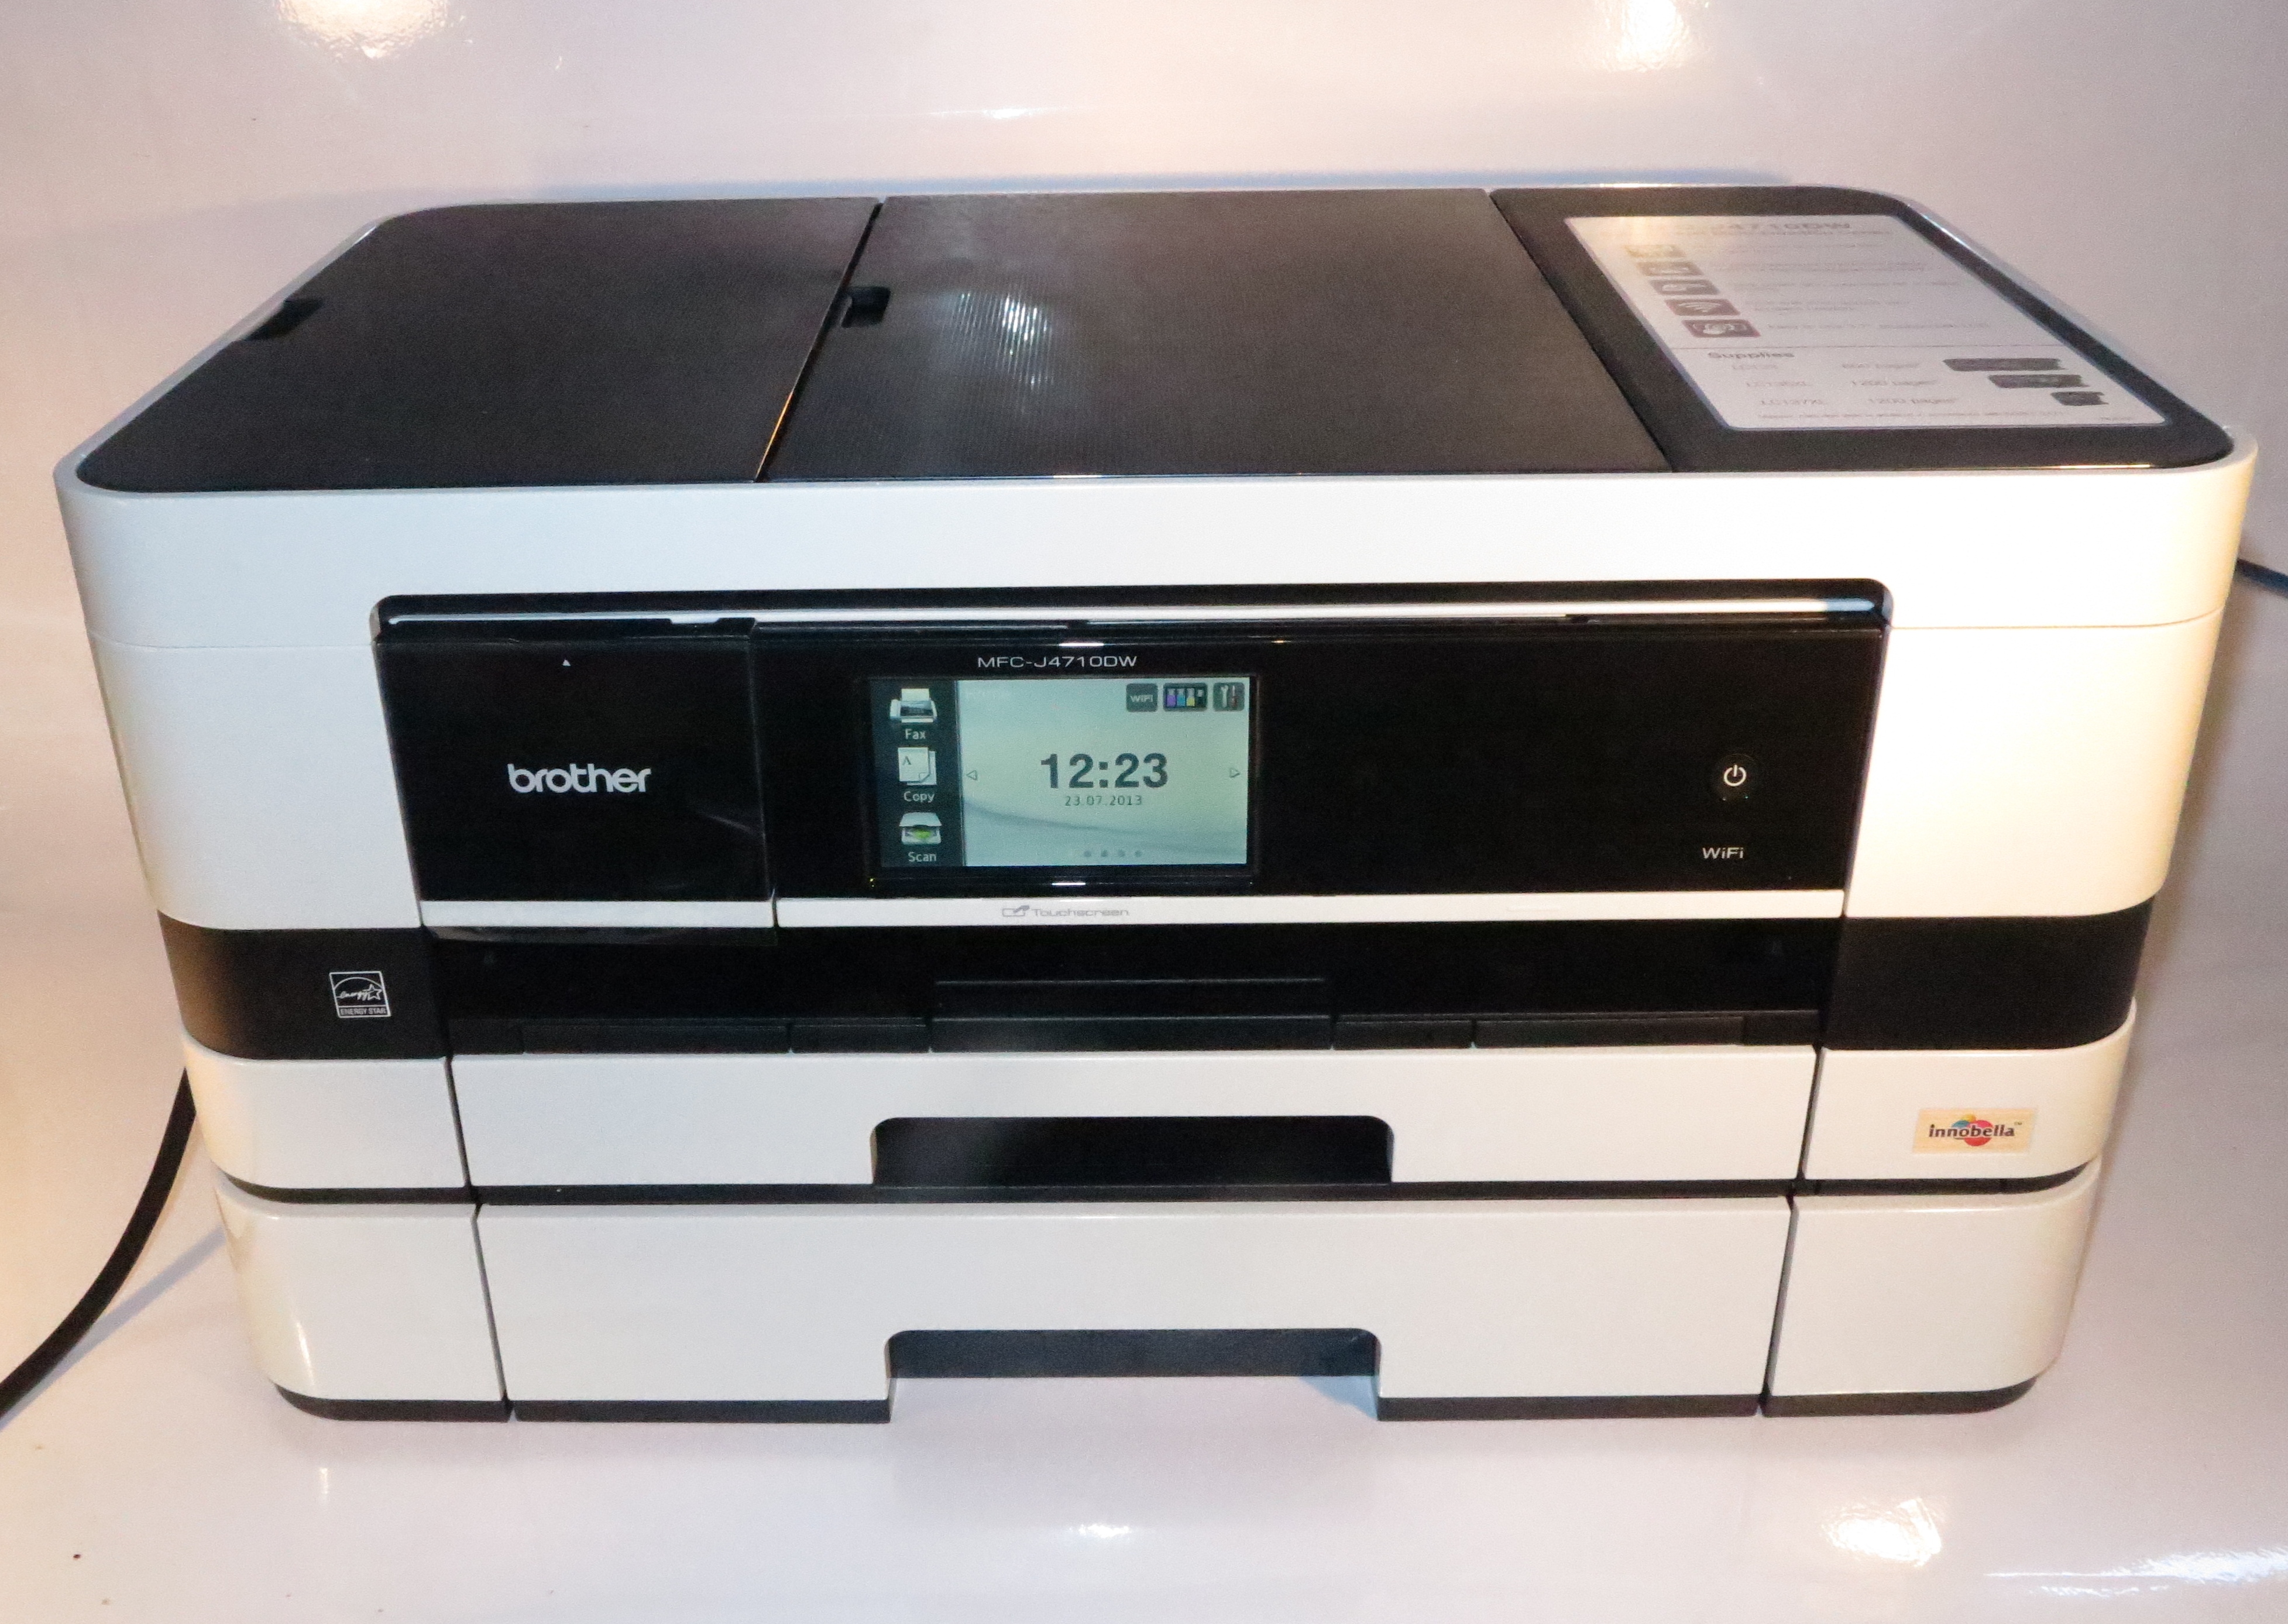 Poor print quality from your Epson or Brother inkjet printer? Airlocks may be the problem